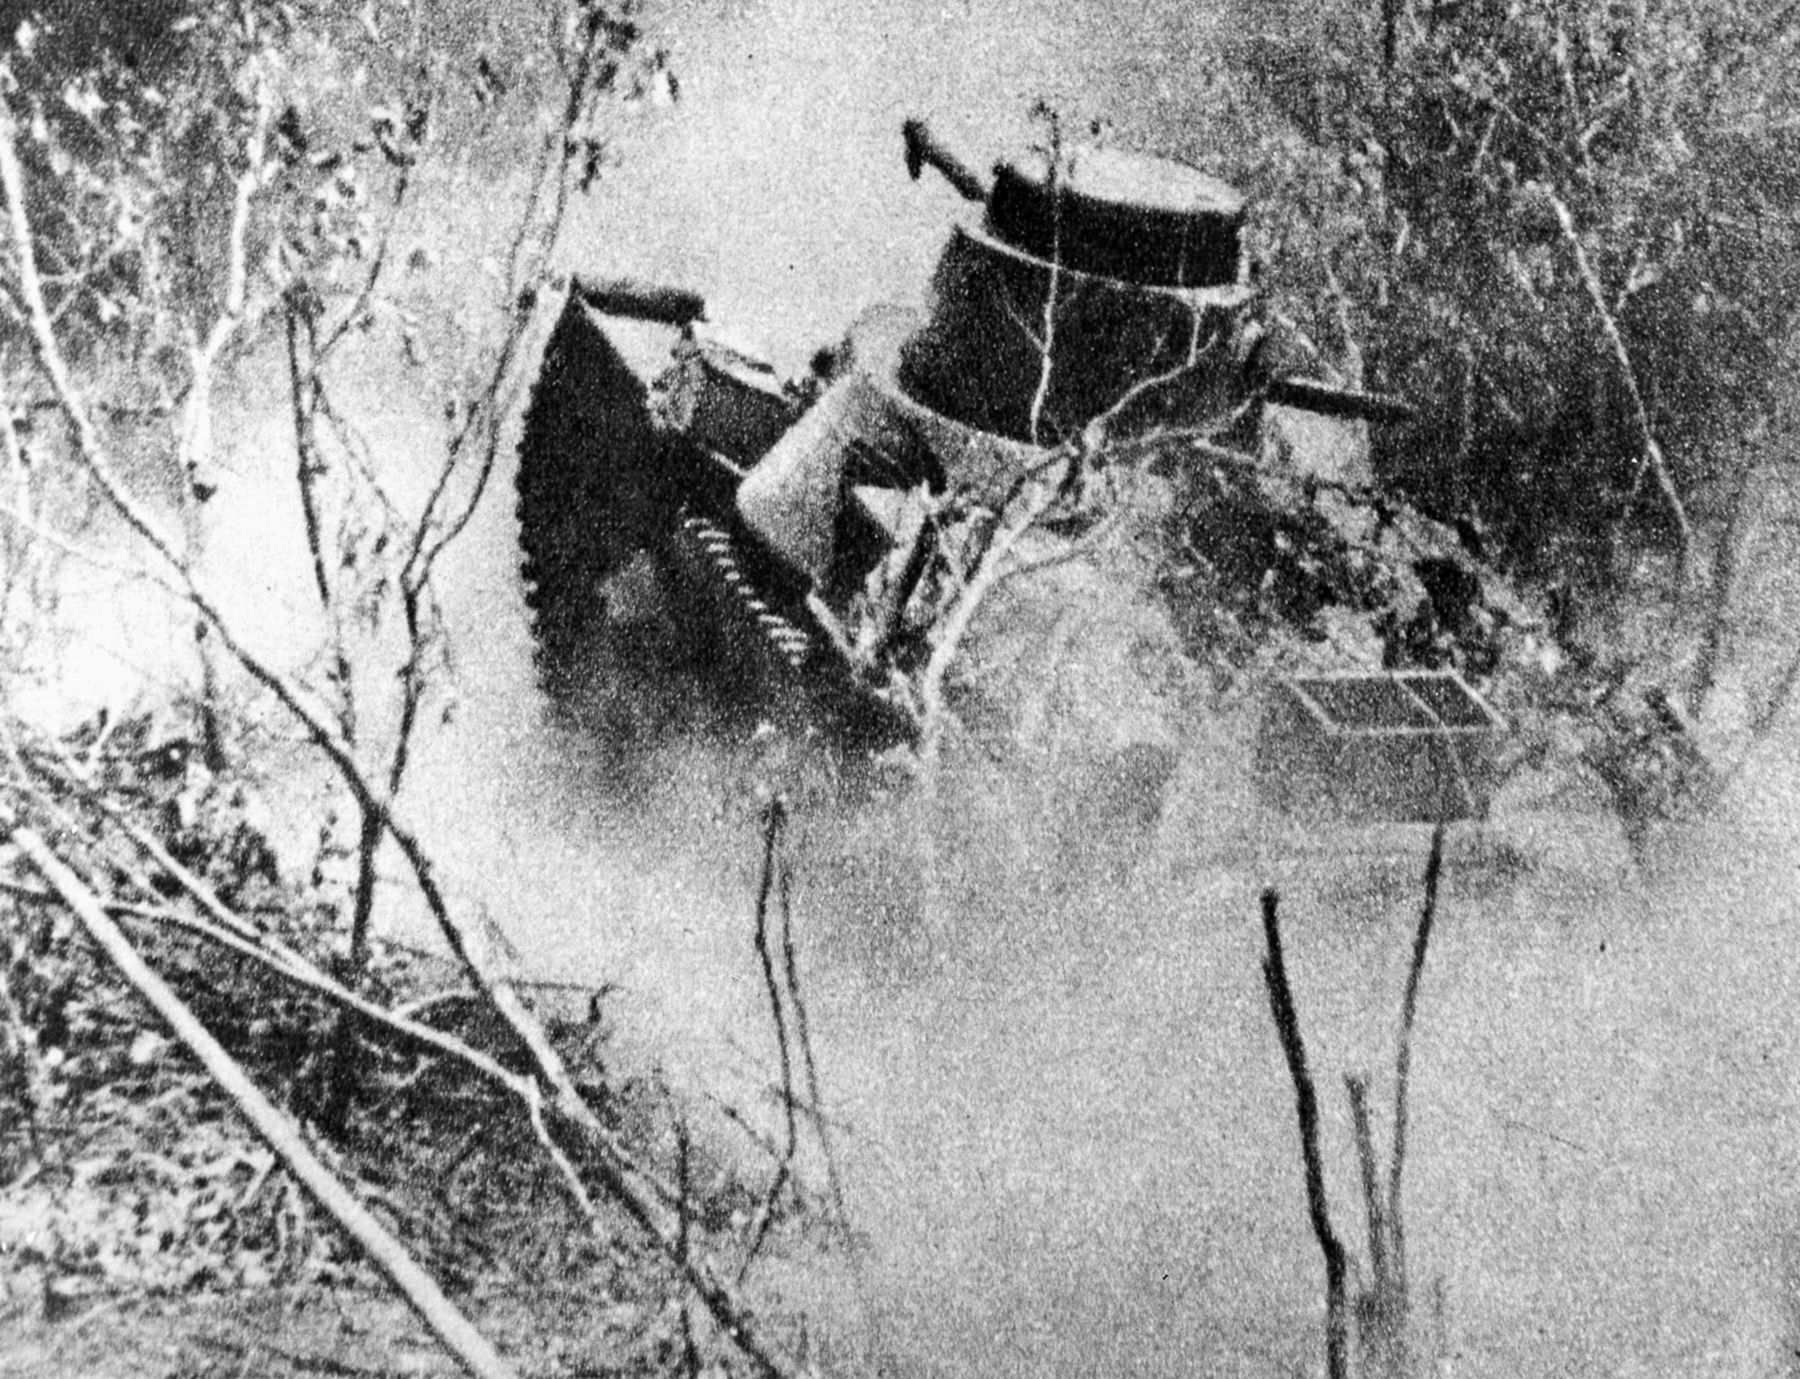 Advancing rapidly through hilly country on the Bataan Peninsula, a Japanese tankette churns up a cloud of dust. Several Japanese armored vehicle types were obsolete by the time World War II began. 